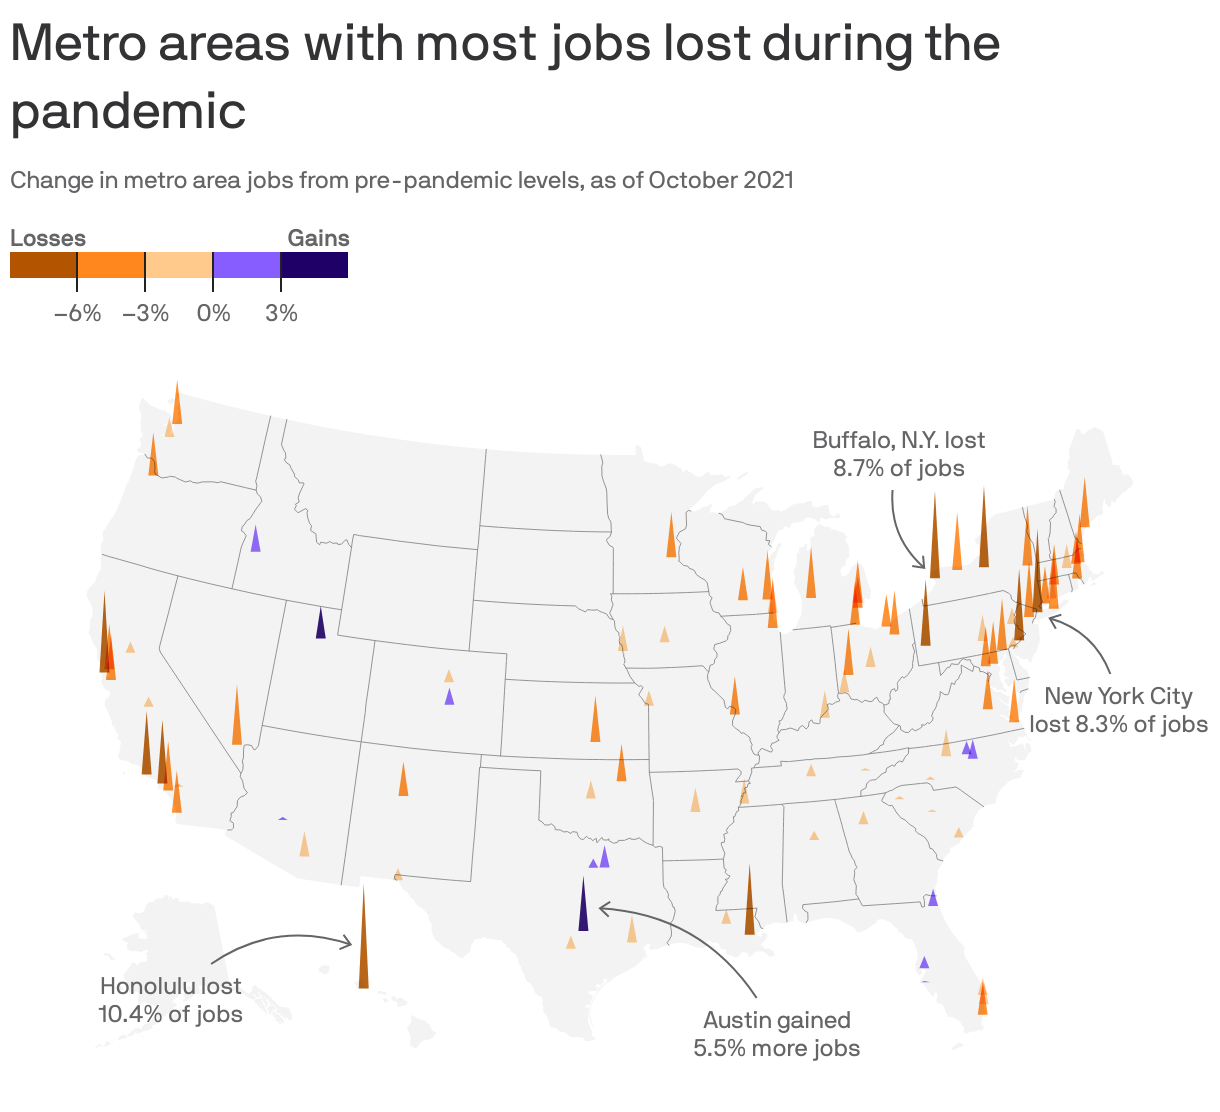 Metro areas with most jobs lost during the pandemic